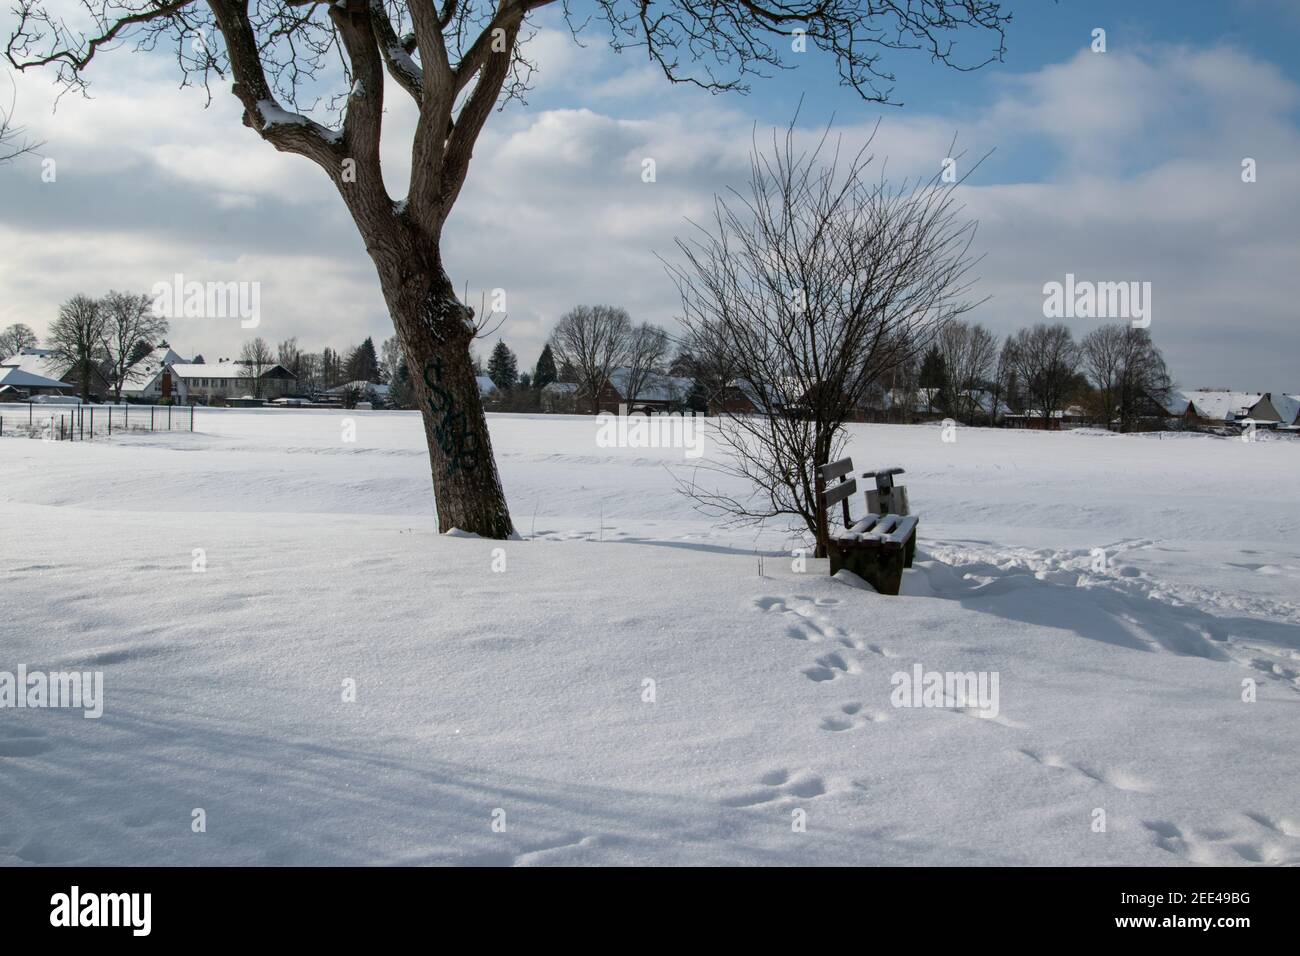 Onset of winter in Bünde. Everything is covered in deep snow. A wooden bench stands under the bare tree. Stock Photo